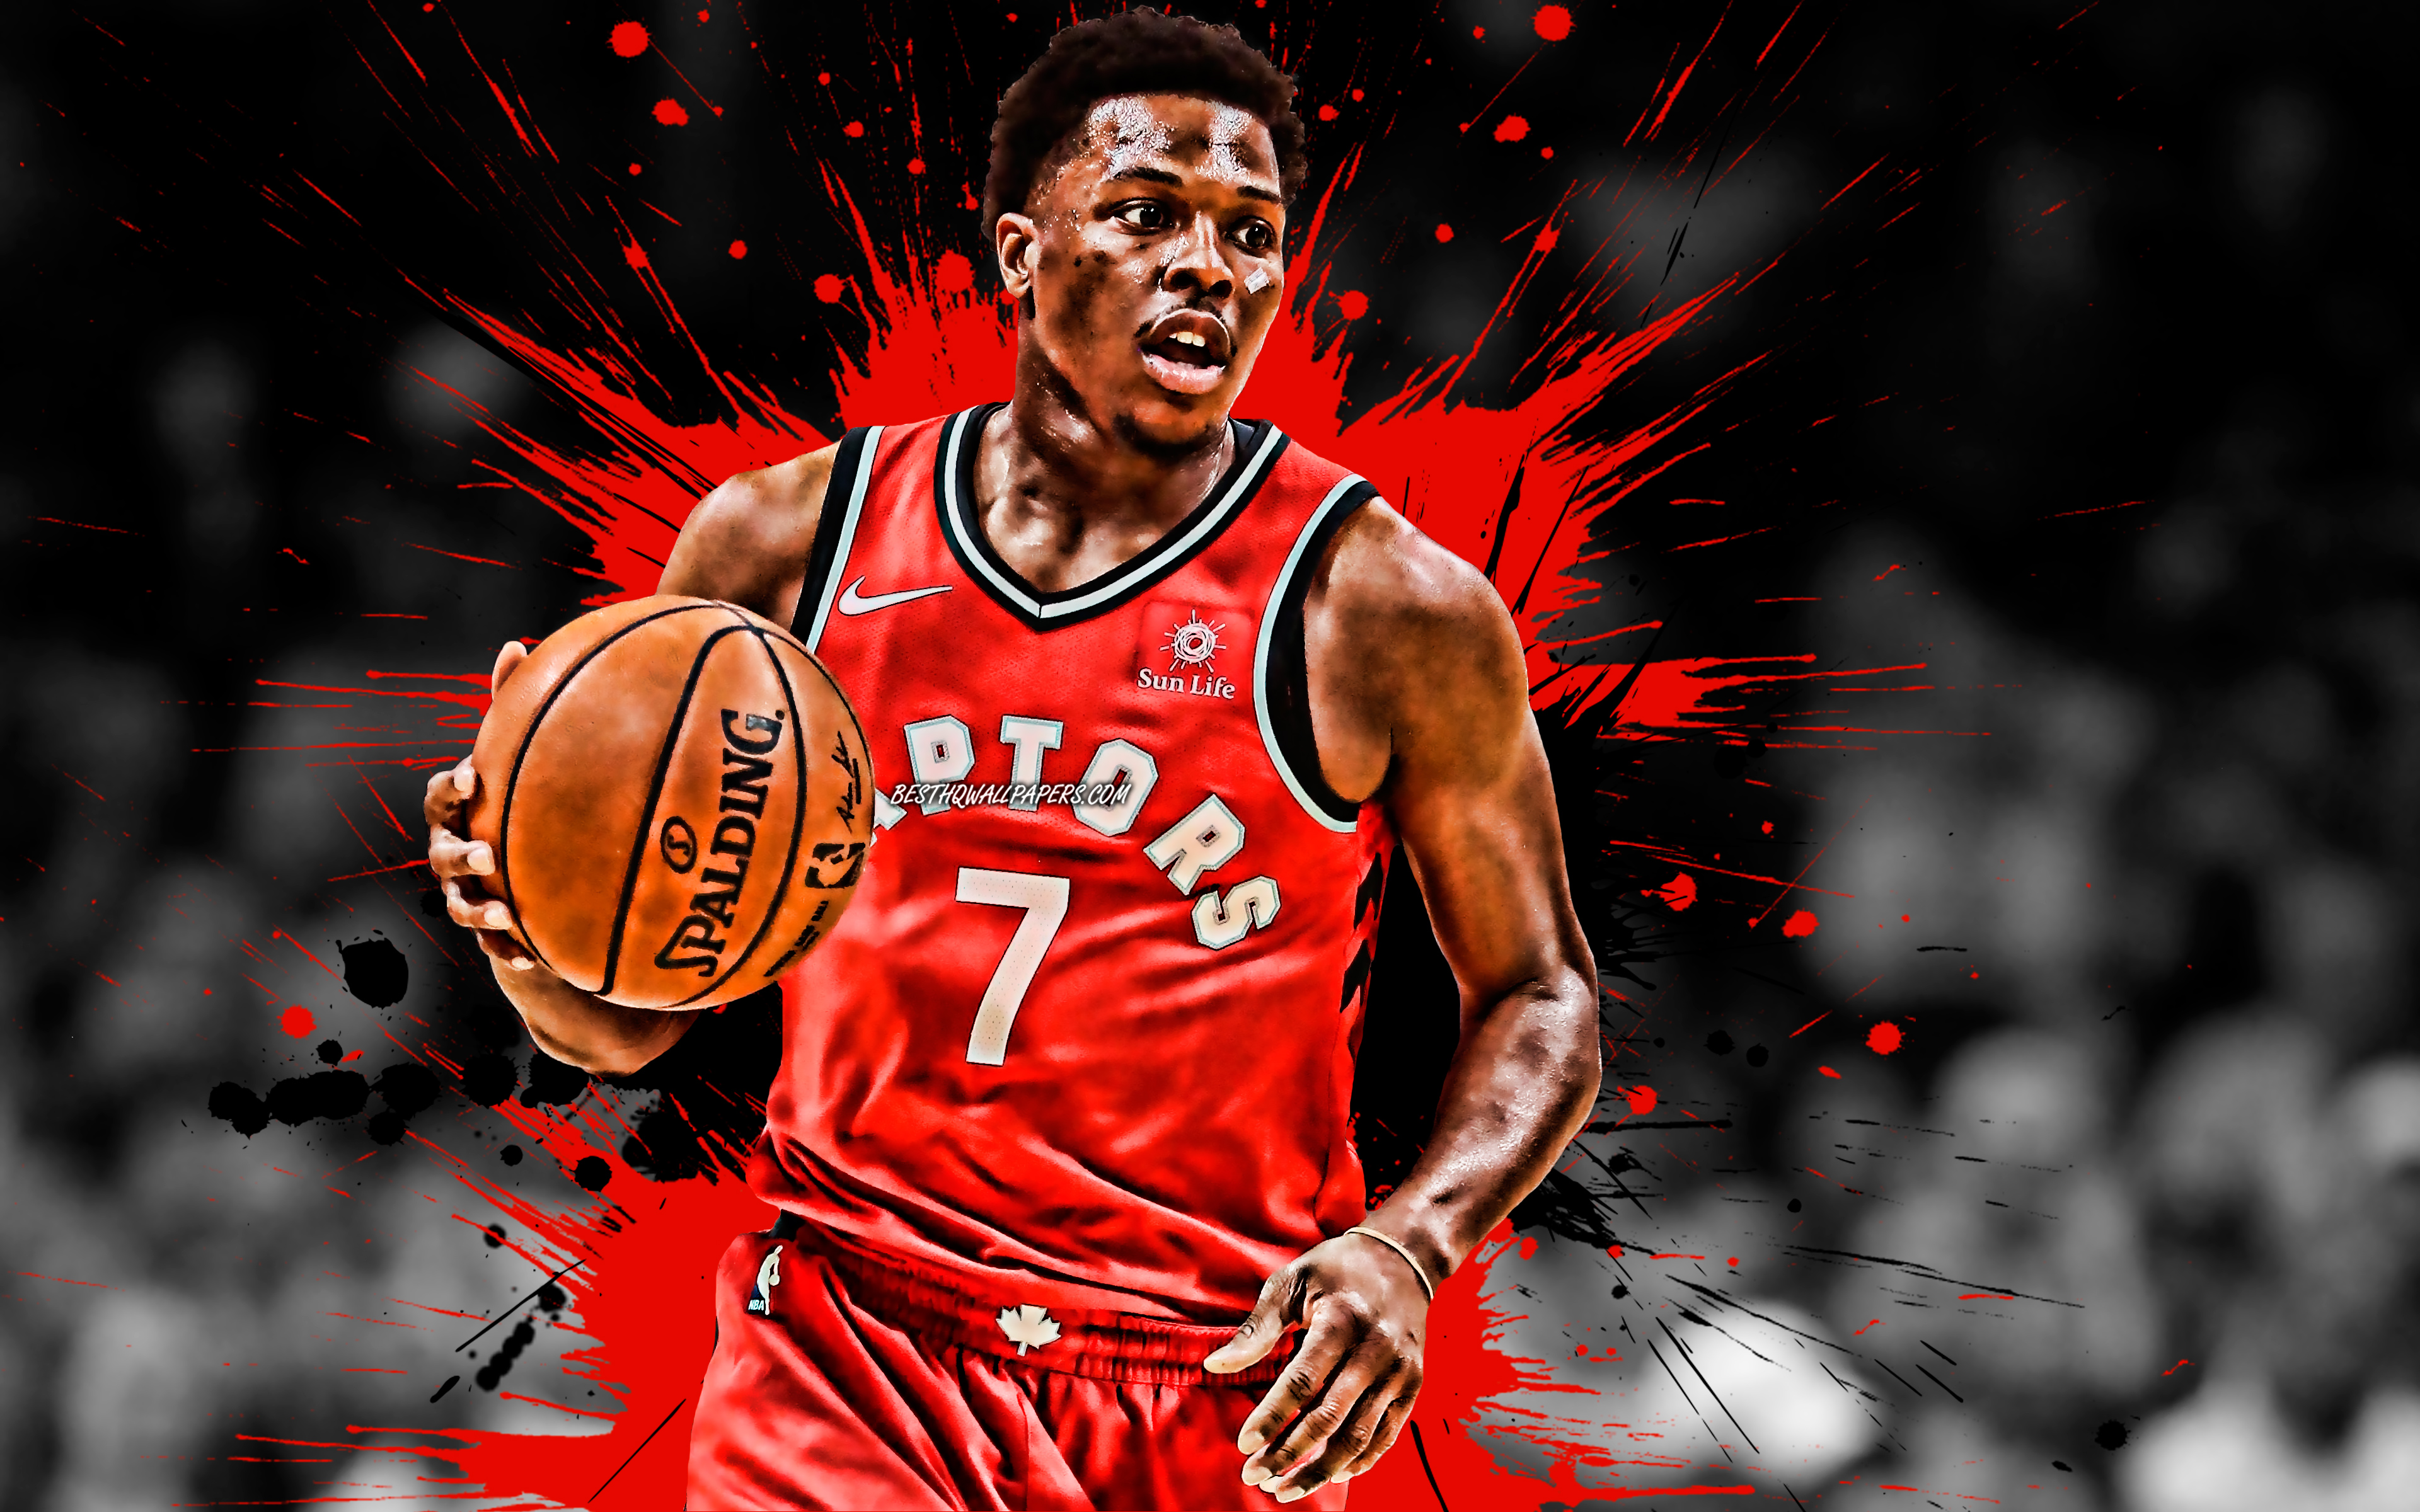 Download wallpaper Kyle Lowry, American basketball player, Toronto Raptors, defender, red black paint splashes, creative art, NBA, USA, basketball, National Basketball Association, grunge for desktop with resolution 3840x2400. High Quality HD picture